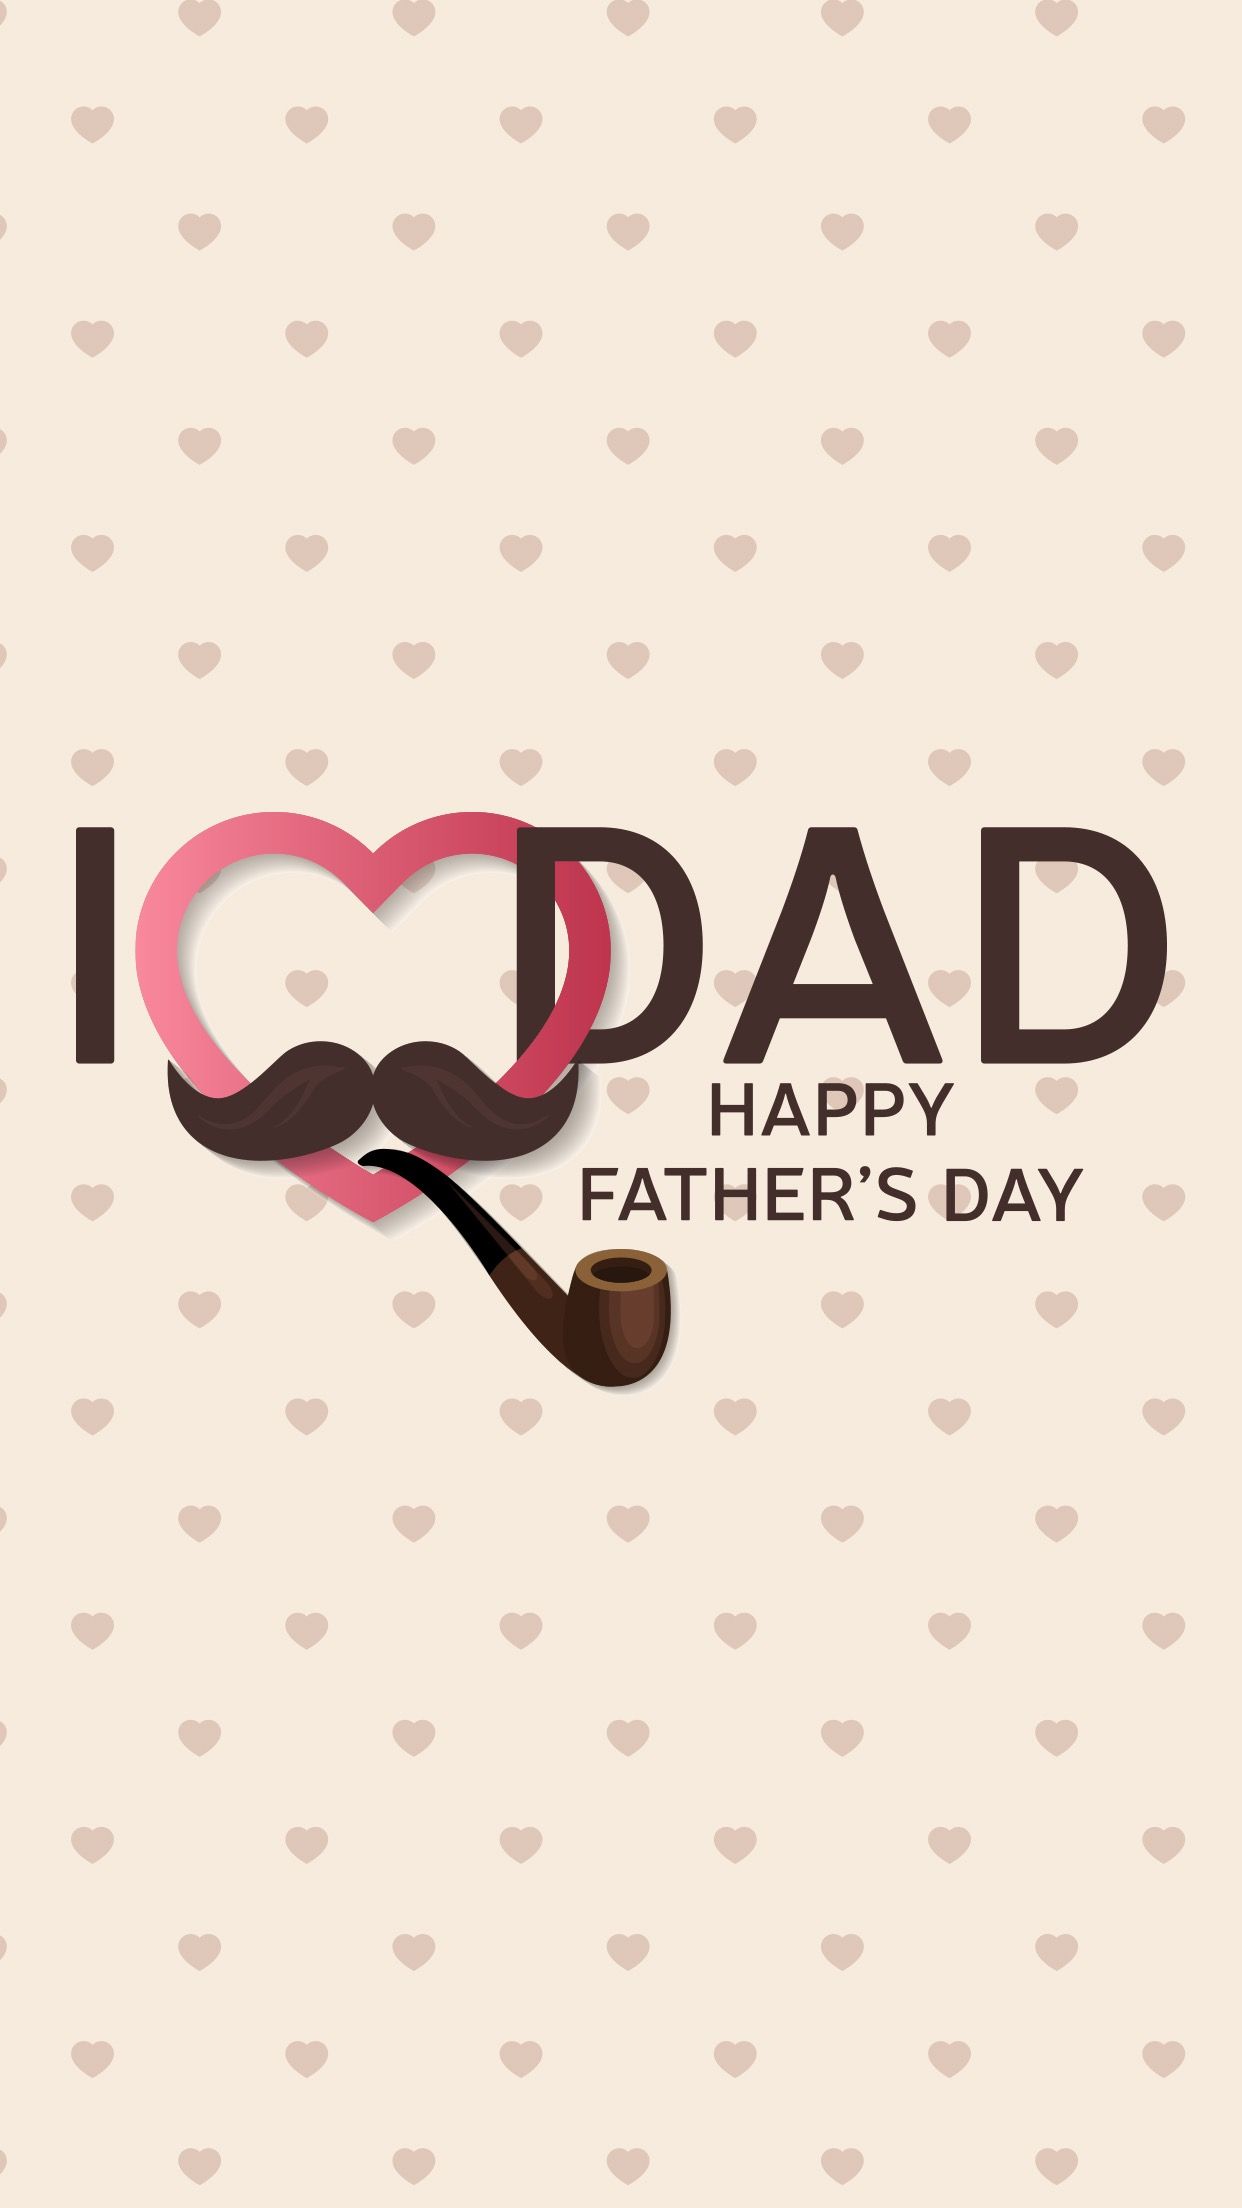 Father's Day iPhone Wallpaper Free Father's Day iPhone Background